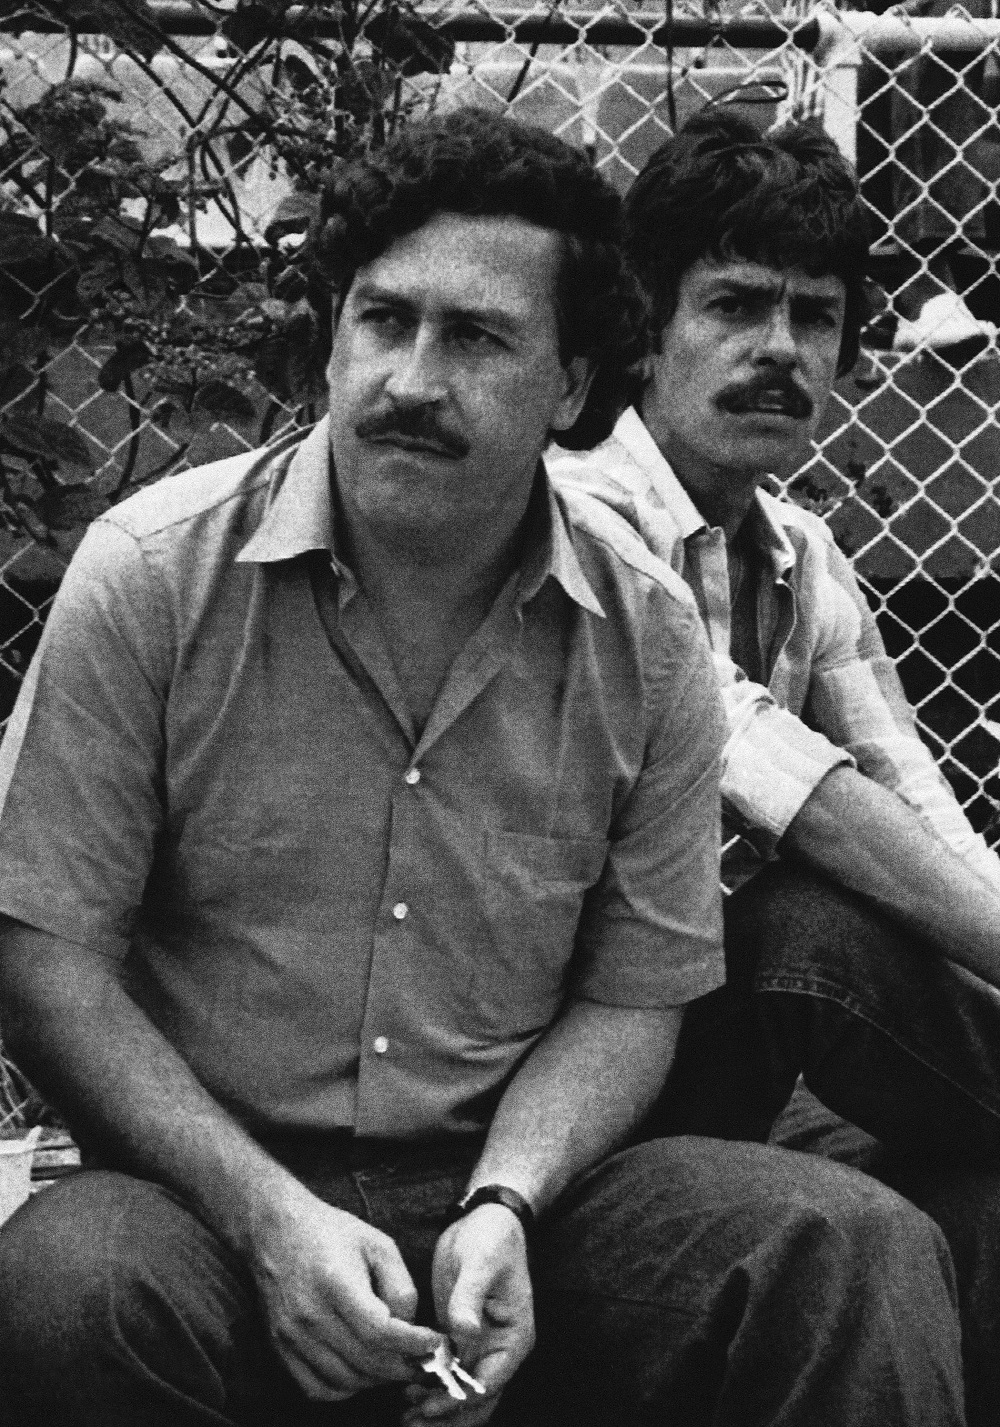 Pablo Escobar watching a football game in Medellin in 1983 [File: AP Photo]